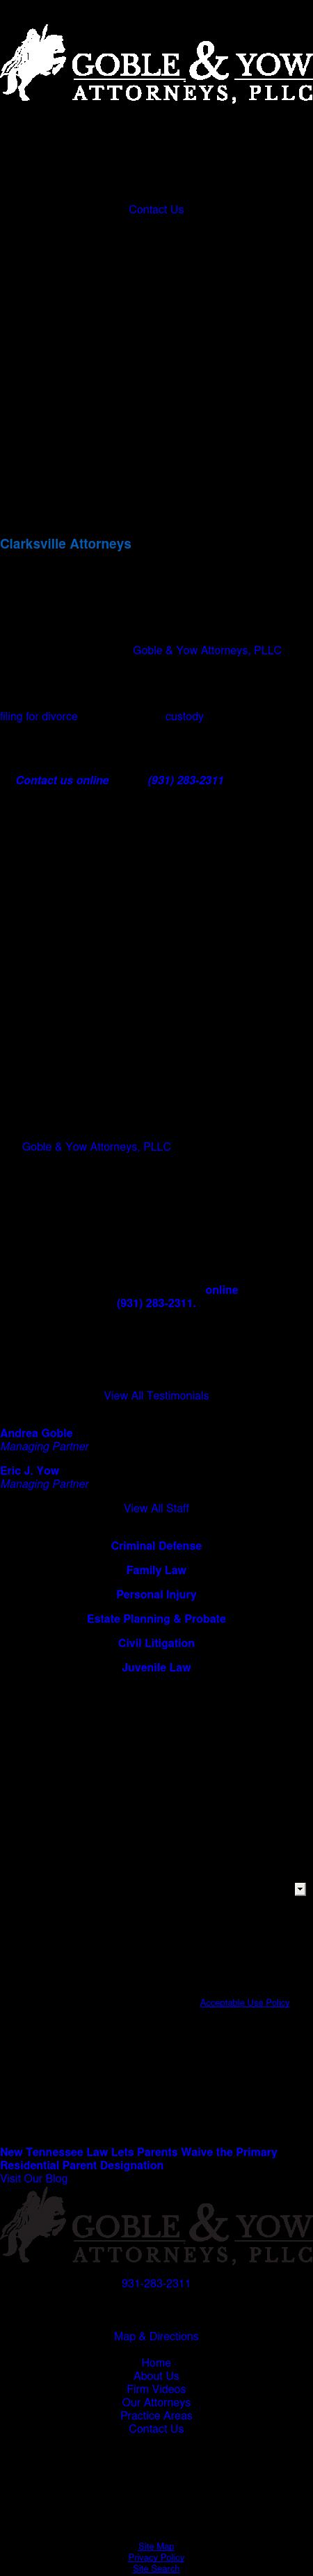 Goble Law Firm - Clarksville TN Lawyers